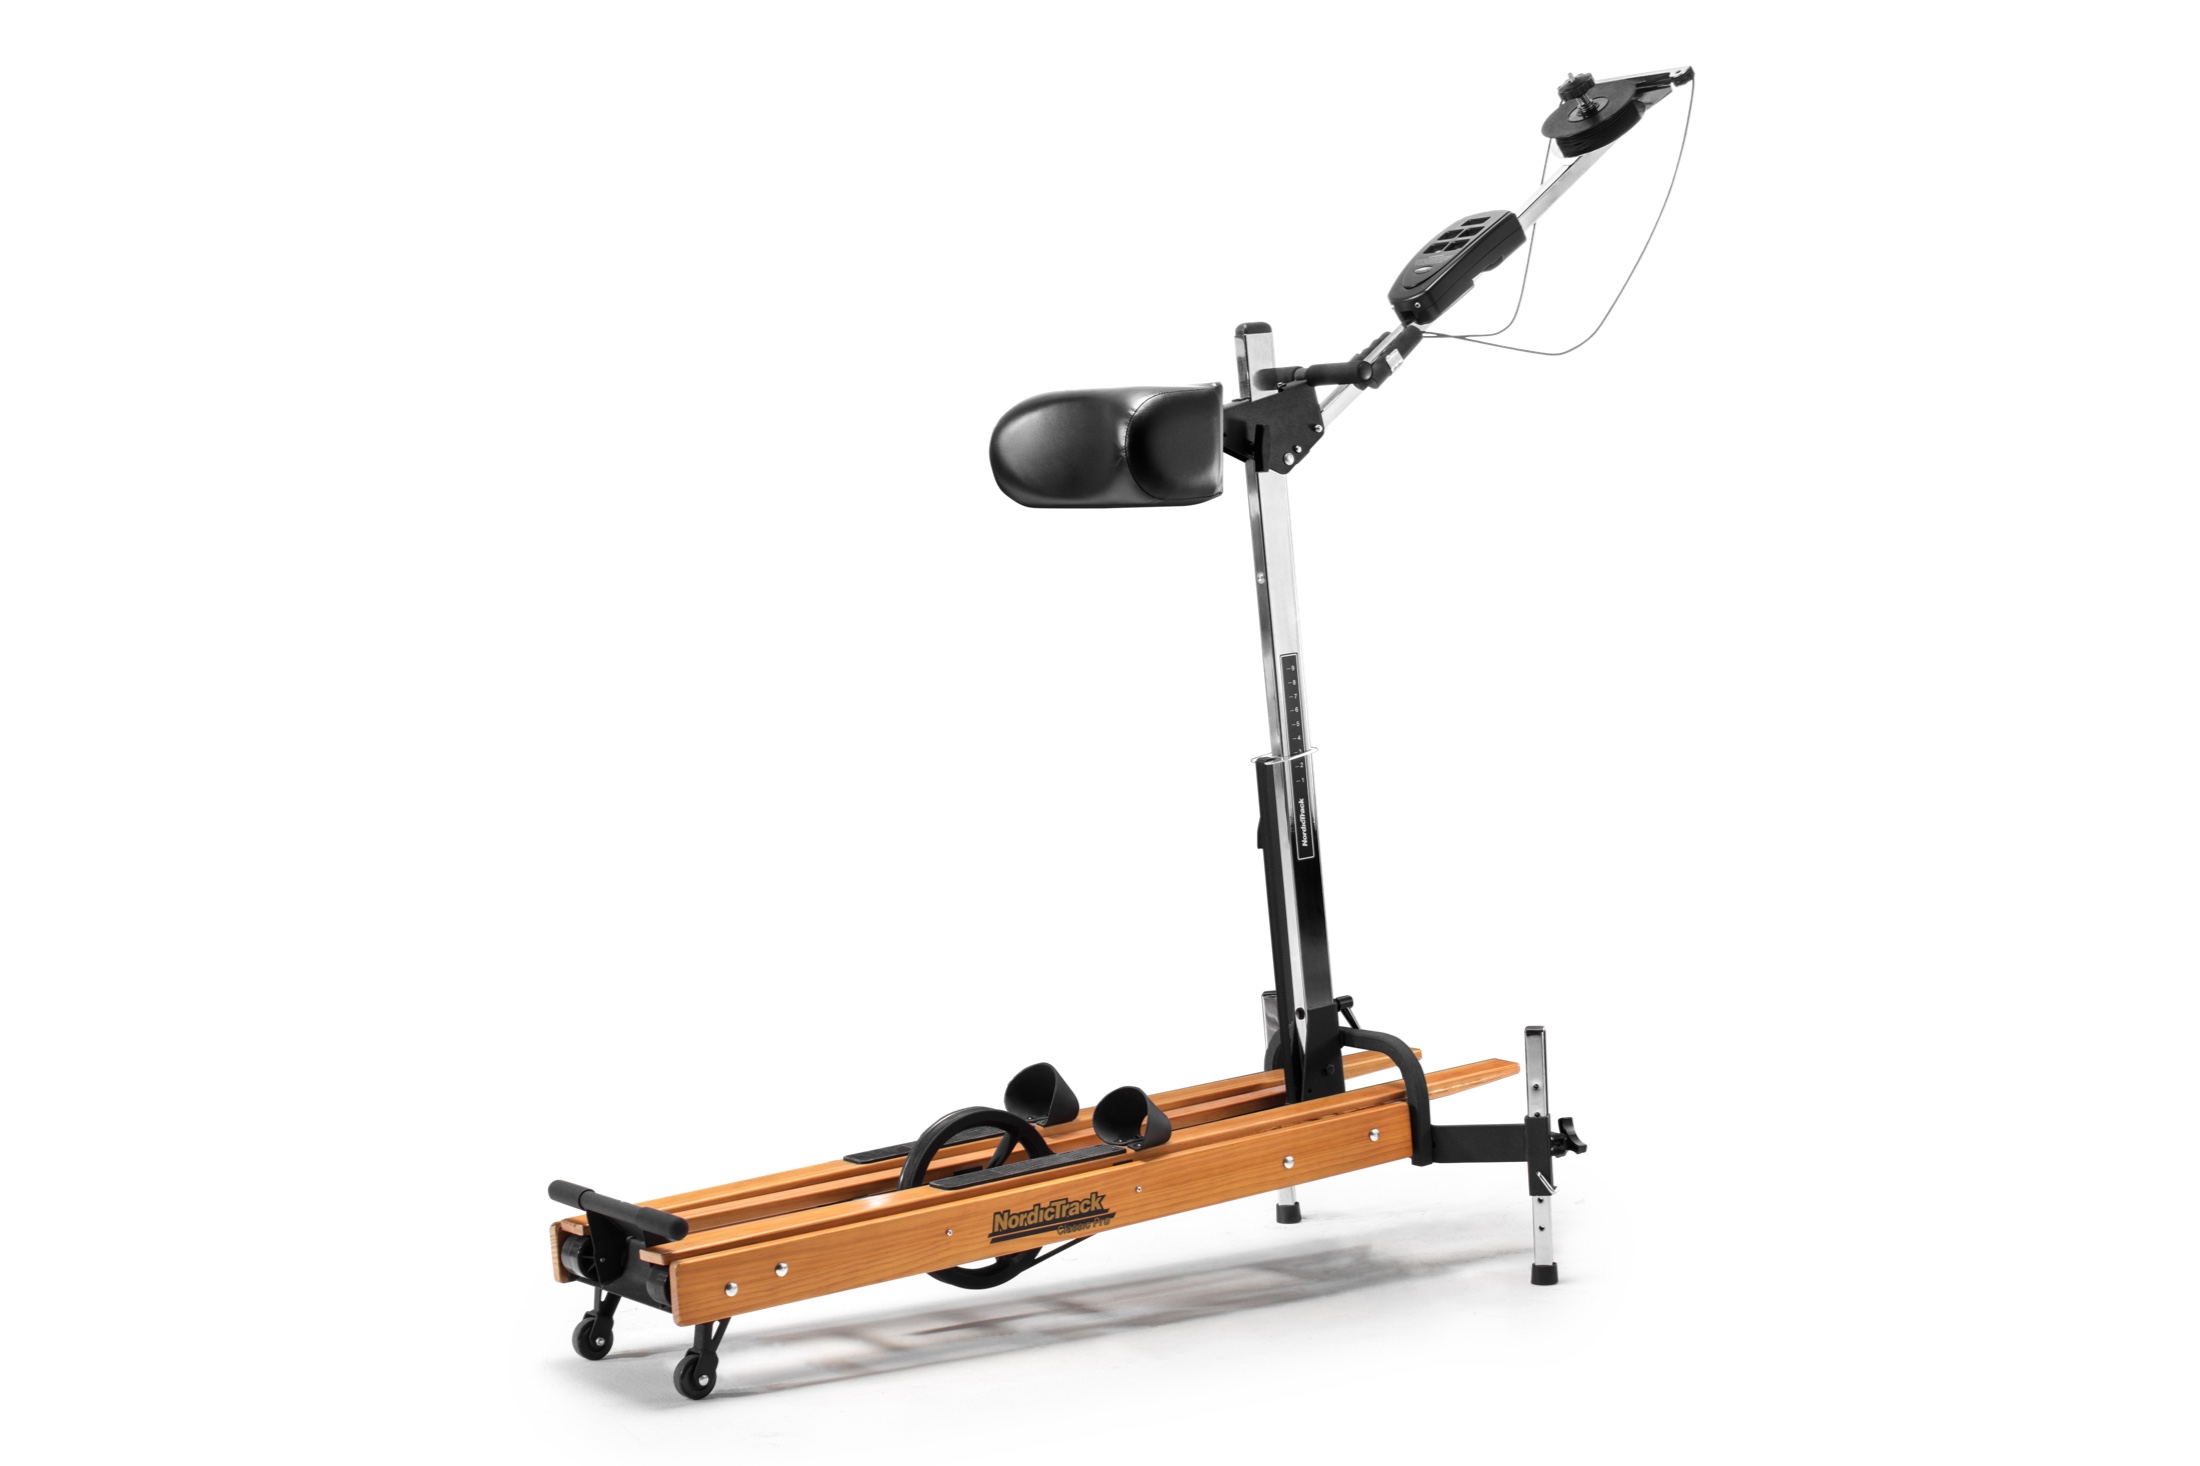 Simple Is the nordictrack ski machine a good workout for Burn Fat fast